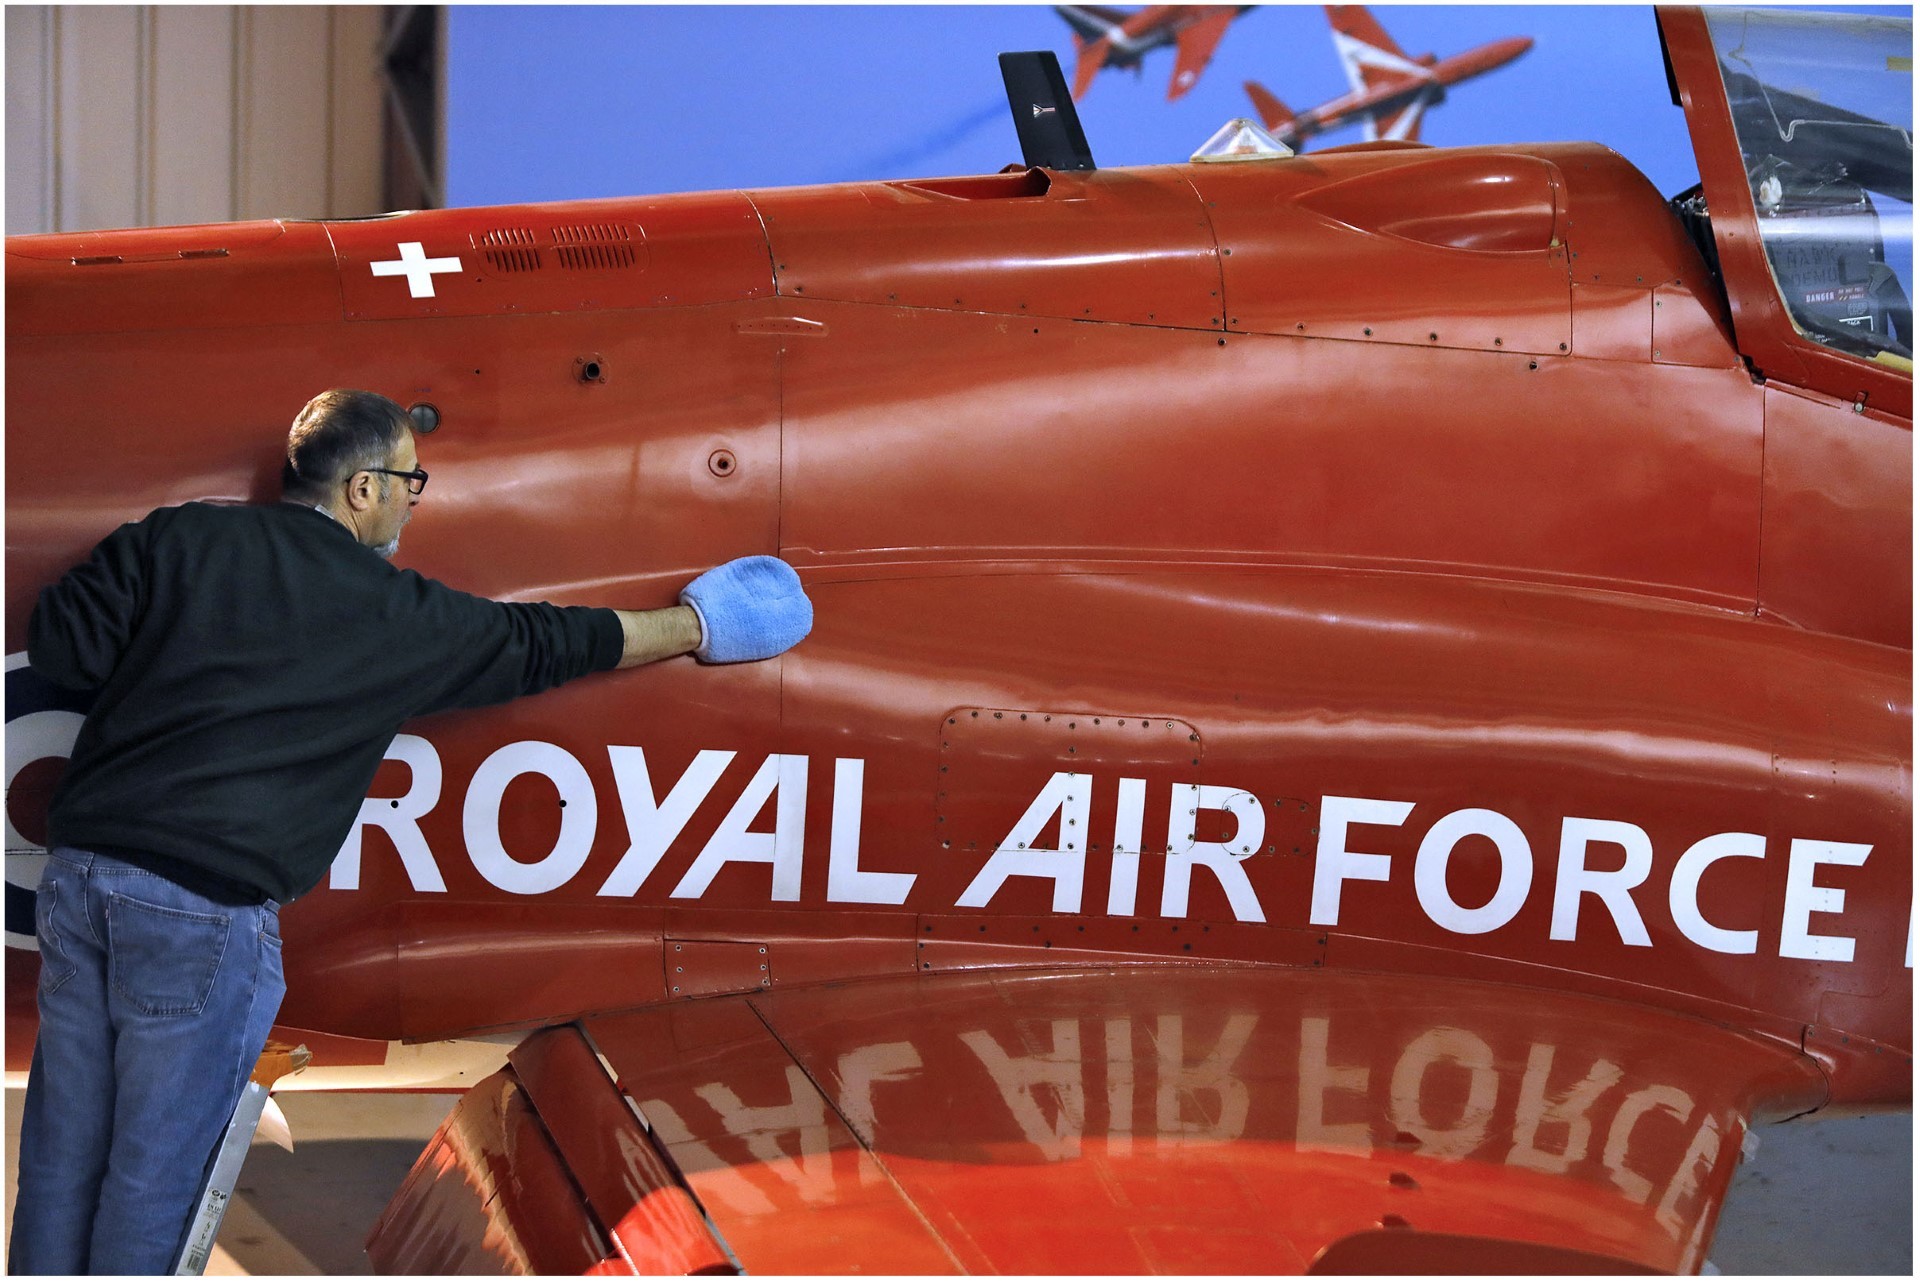 Principal Conservator, Stuart McDonald prepares a 1980 Red Arrows Hawk T.1A for the new visitor season at the National Museum of Flight, East Lothian. This year marks 25 years since the aircraft flew in Red 1 position over Edinburgh to mark the opening